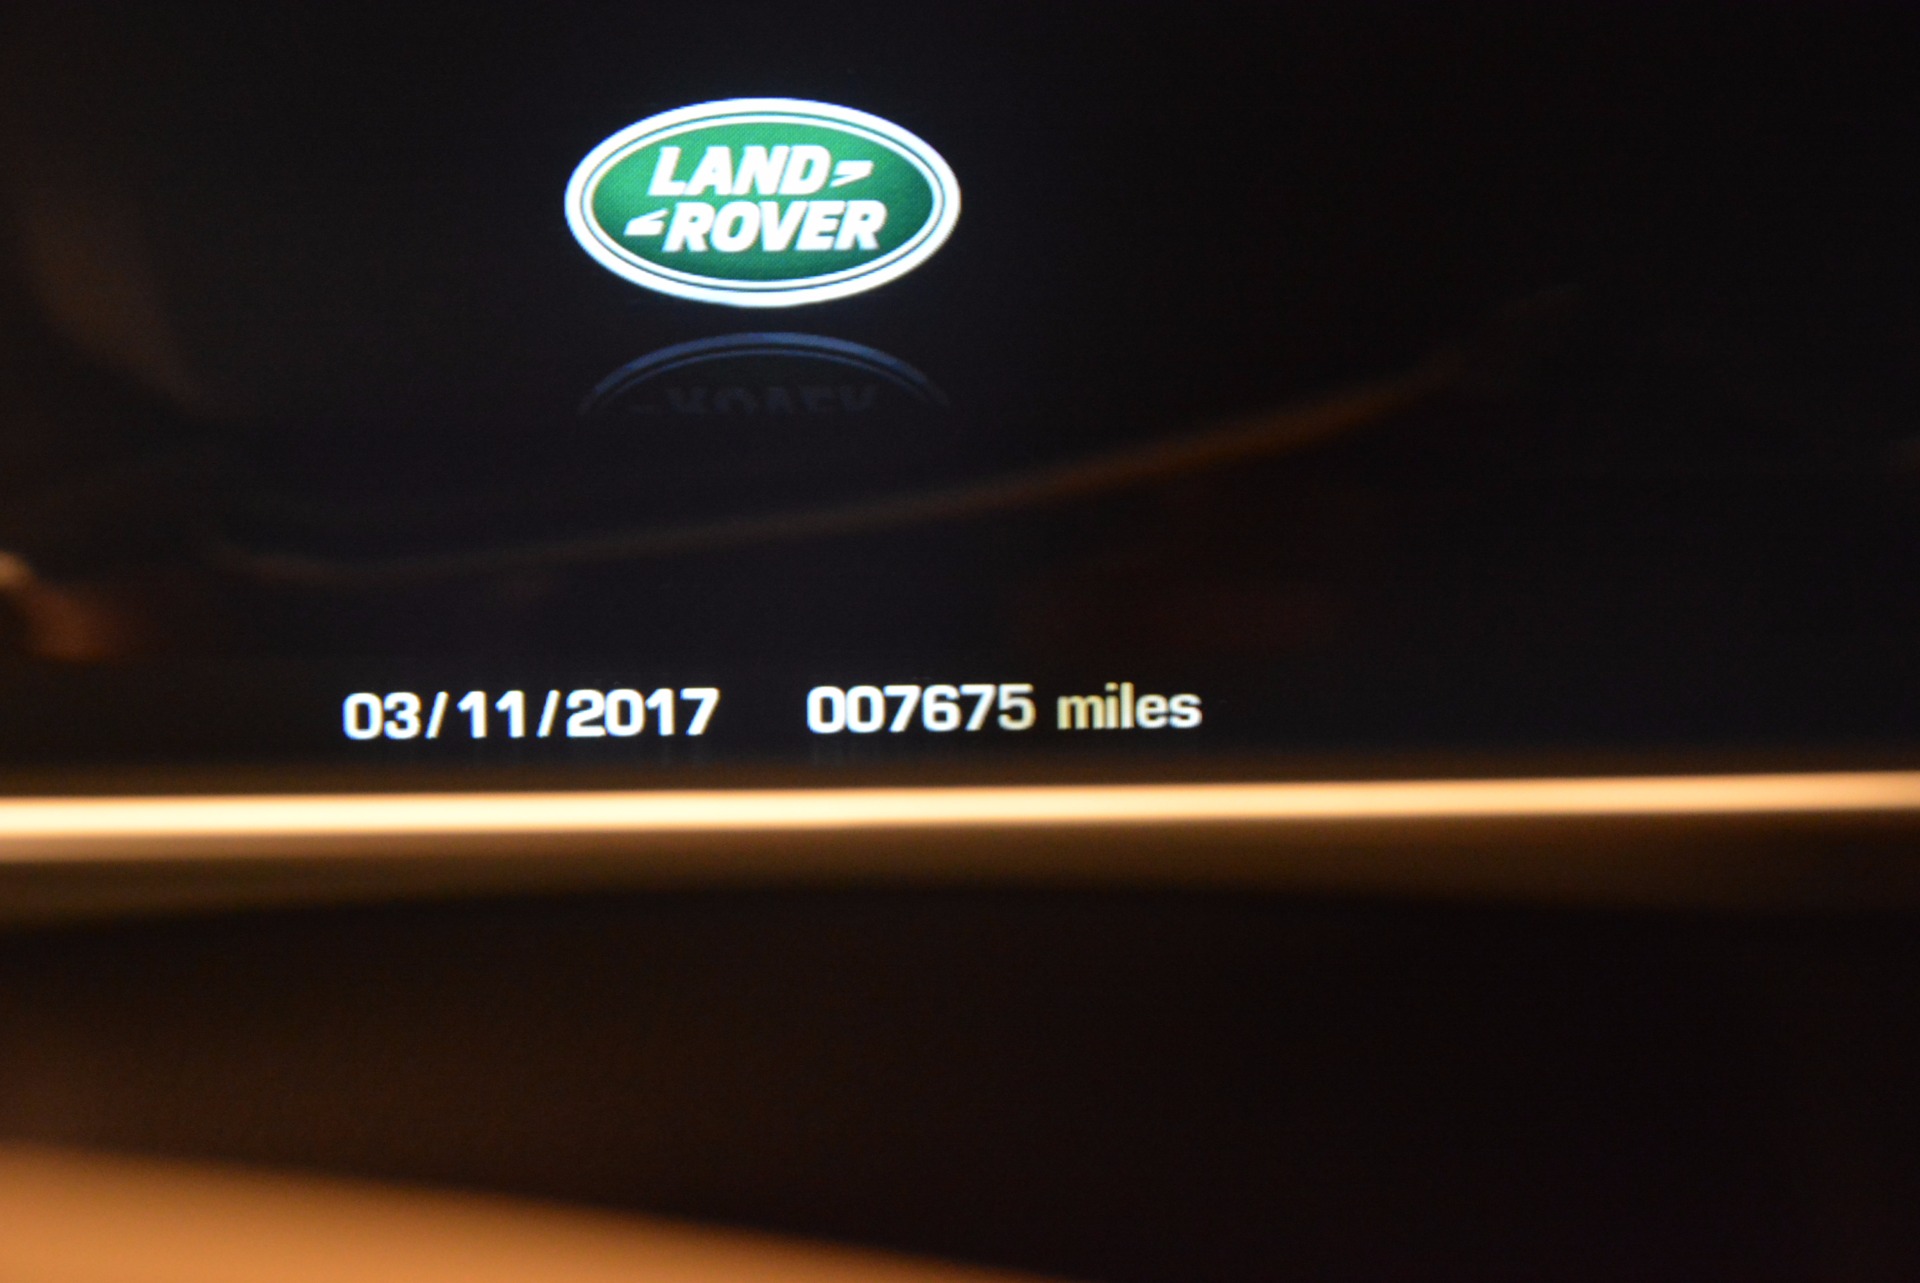 Used 2016 Land Rover Range Rover HSE TD6